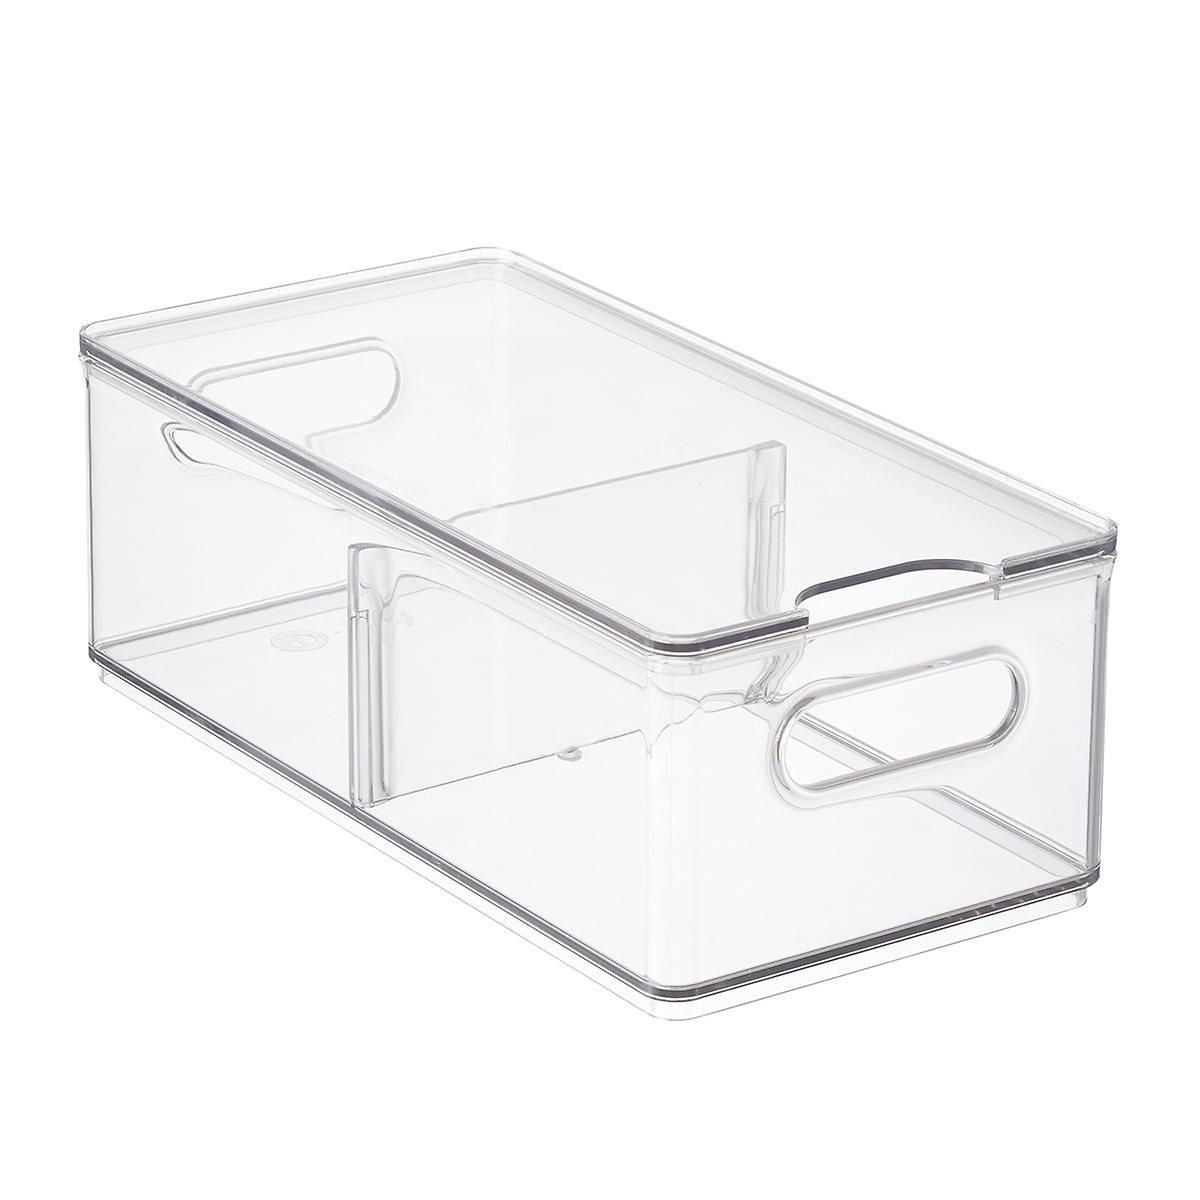 Case of 8 T.H.E. Lg Divided Fridge Bin | The Container Store